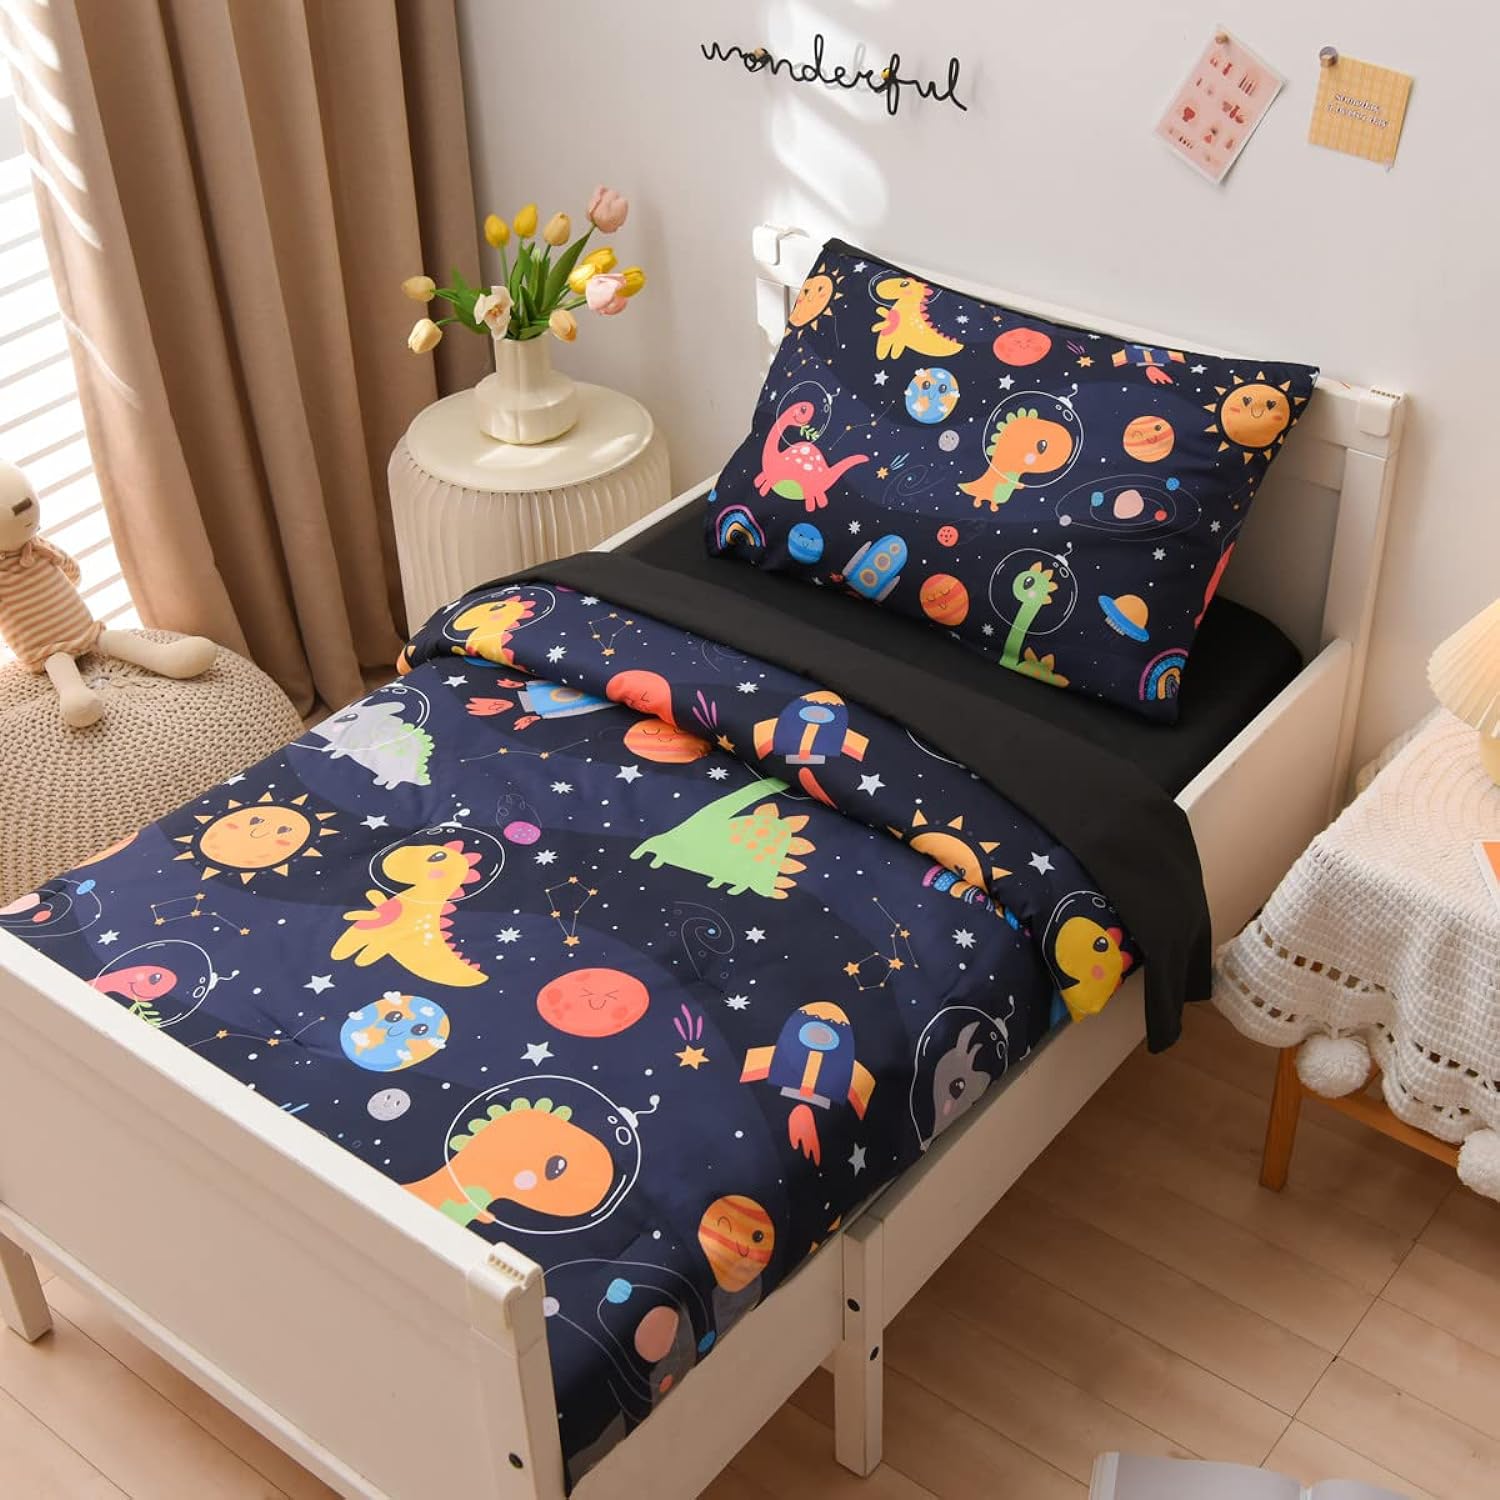 Great Choice Products 4 Pieces Toddler Bedding Set For Baby Girls Boys,Galaxy Space Dinosaur Pattern, Includes Comforter, Flat Sheet, Fitted Sheet …